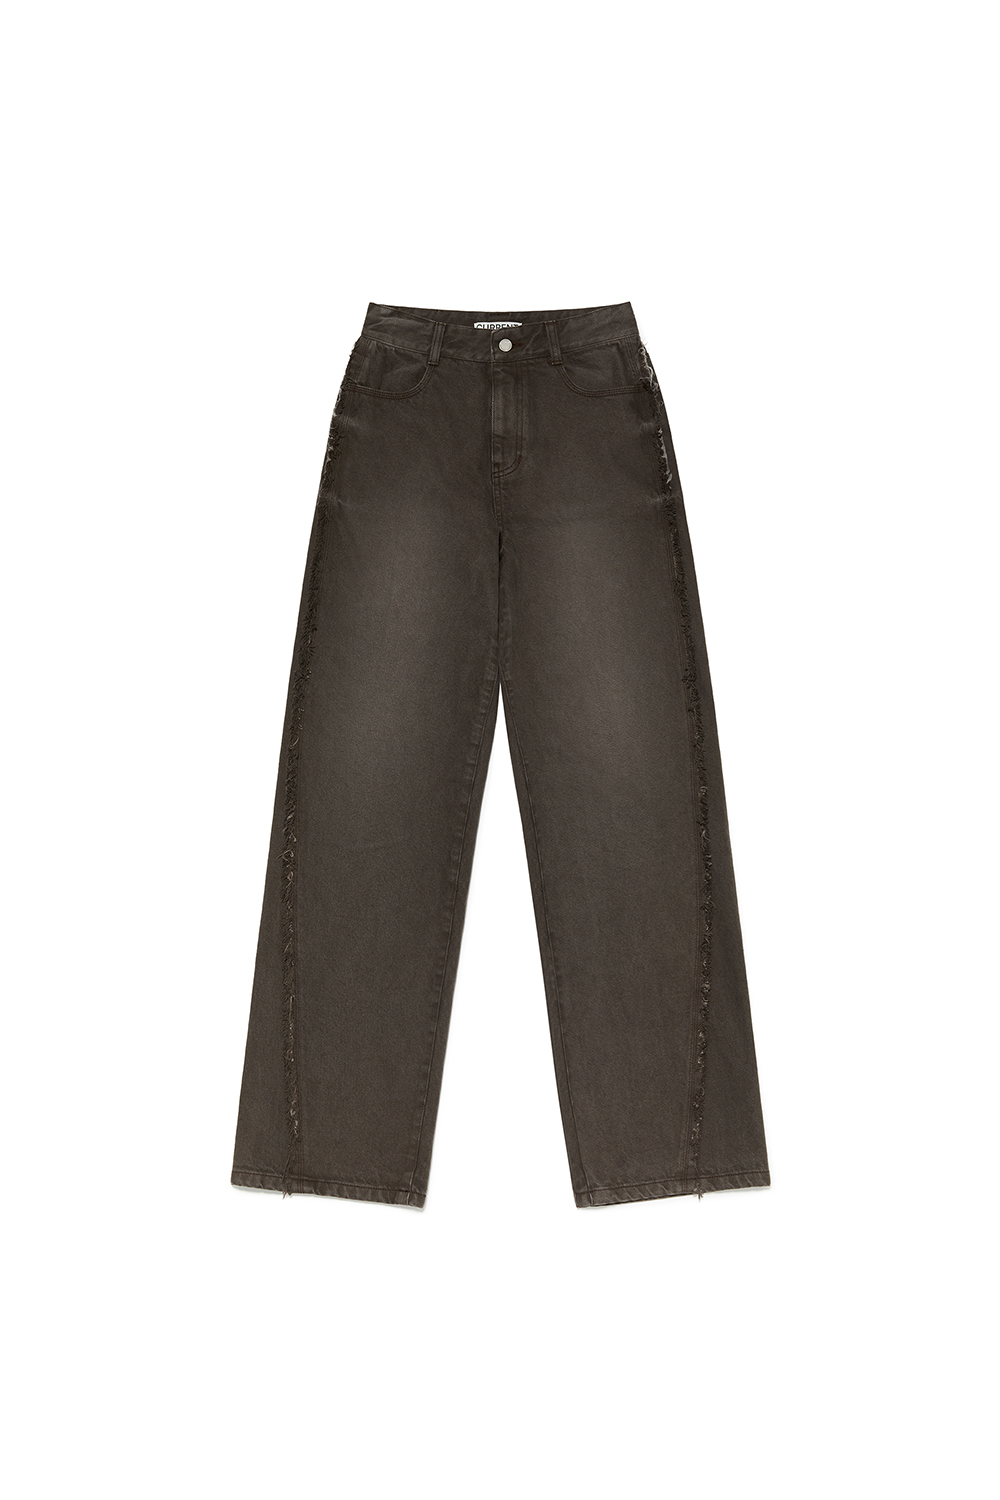 CURVED DYING JEANS [DARK BROWN]		